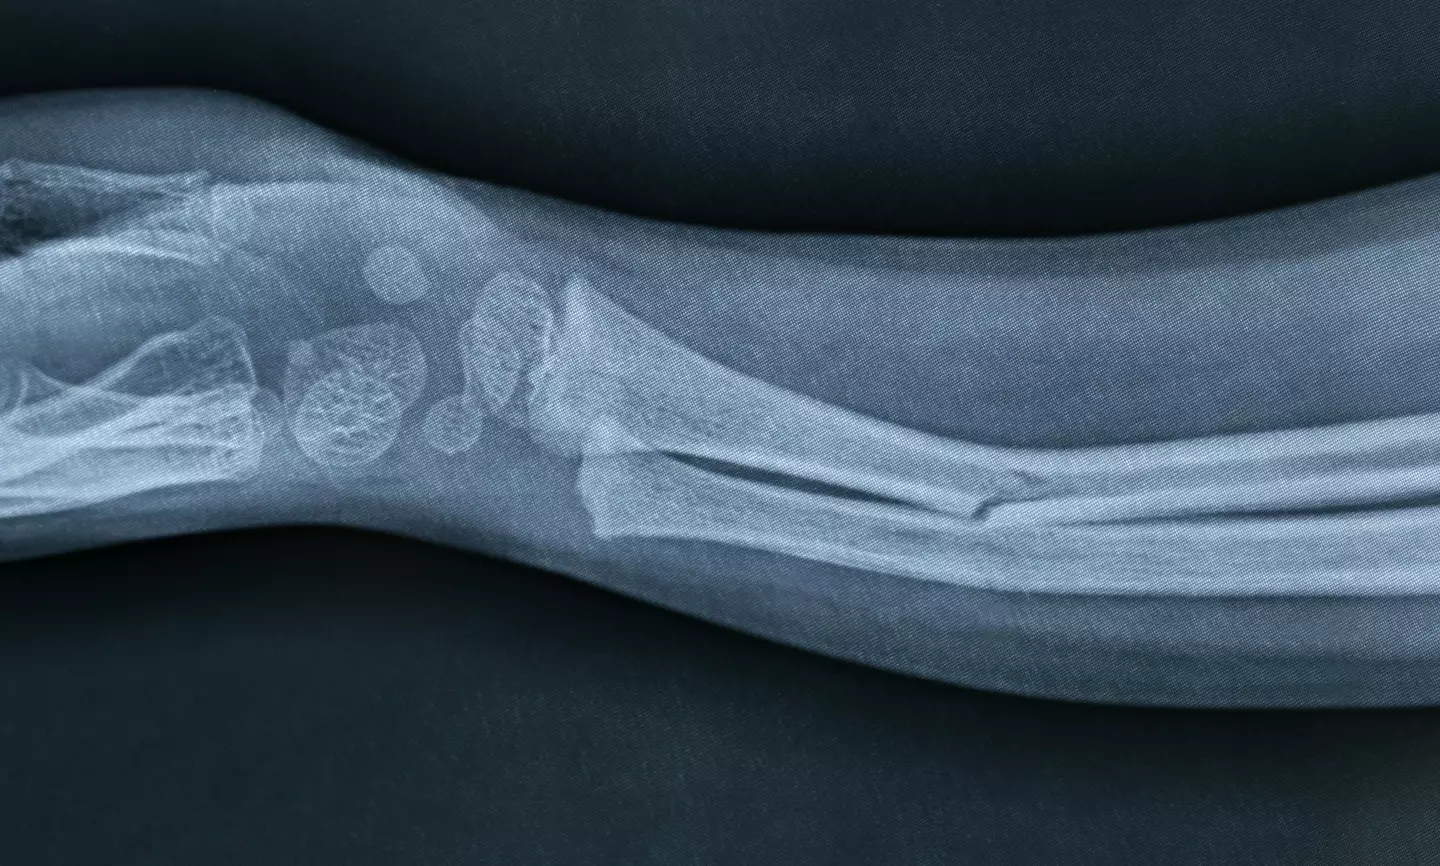 A broken bone is included in the NHS' list of the top 20 most painful human experiences.